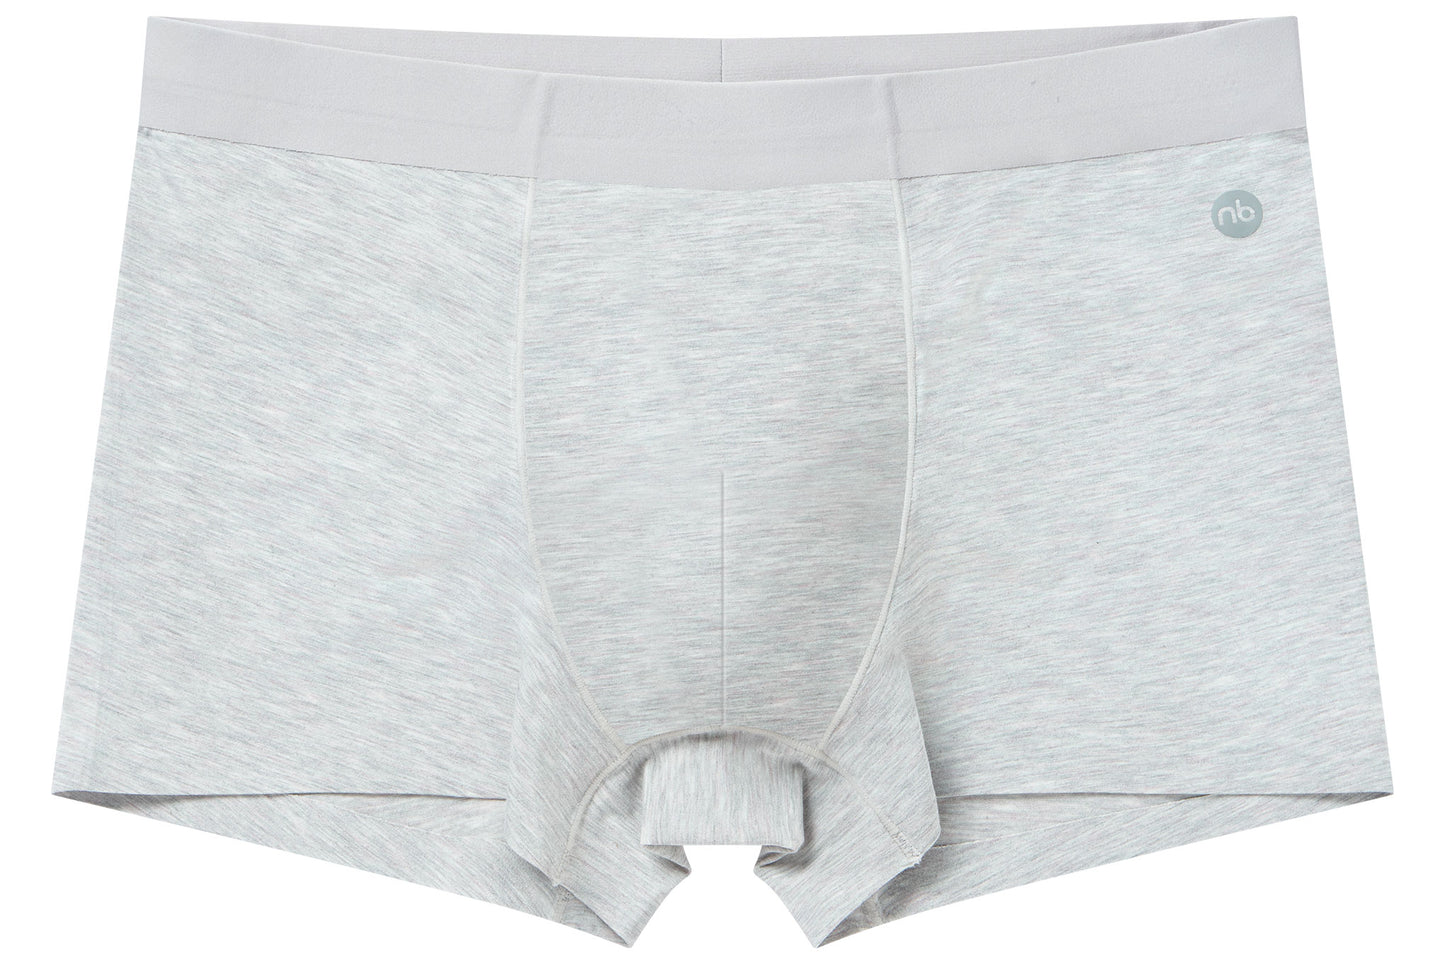 Men's Basics Boxer Briefs (Bamboo Spandex, 2 Pack) - Charcoal And Grey Dusk